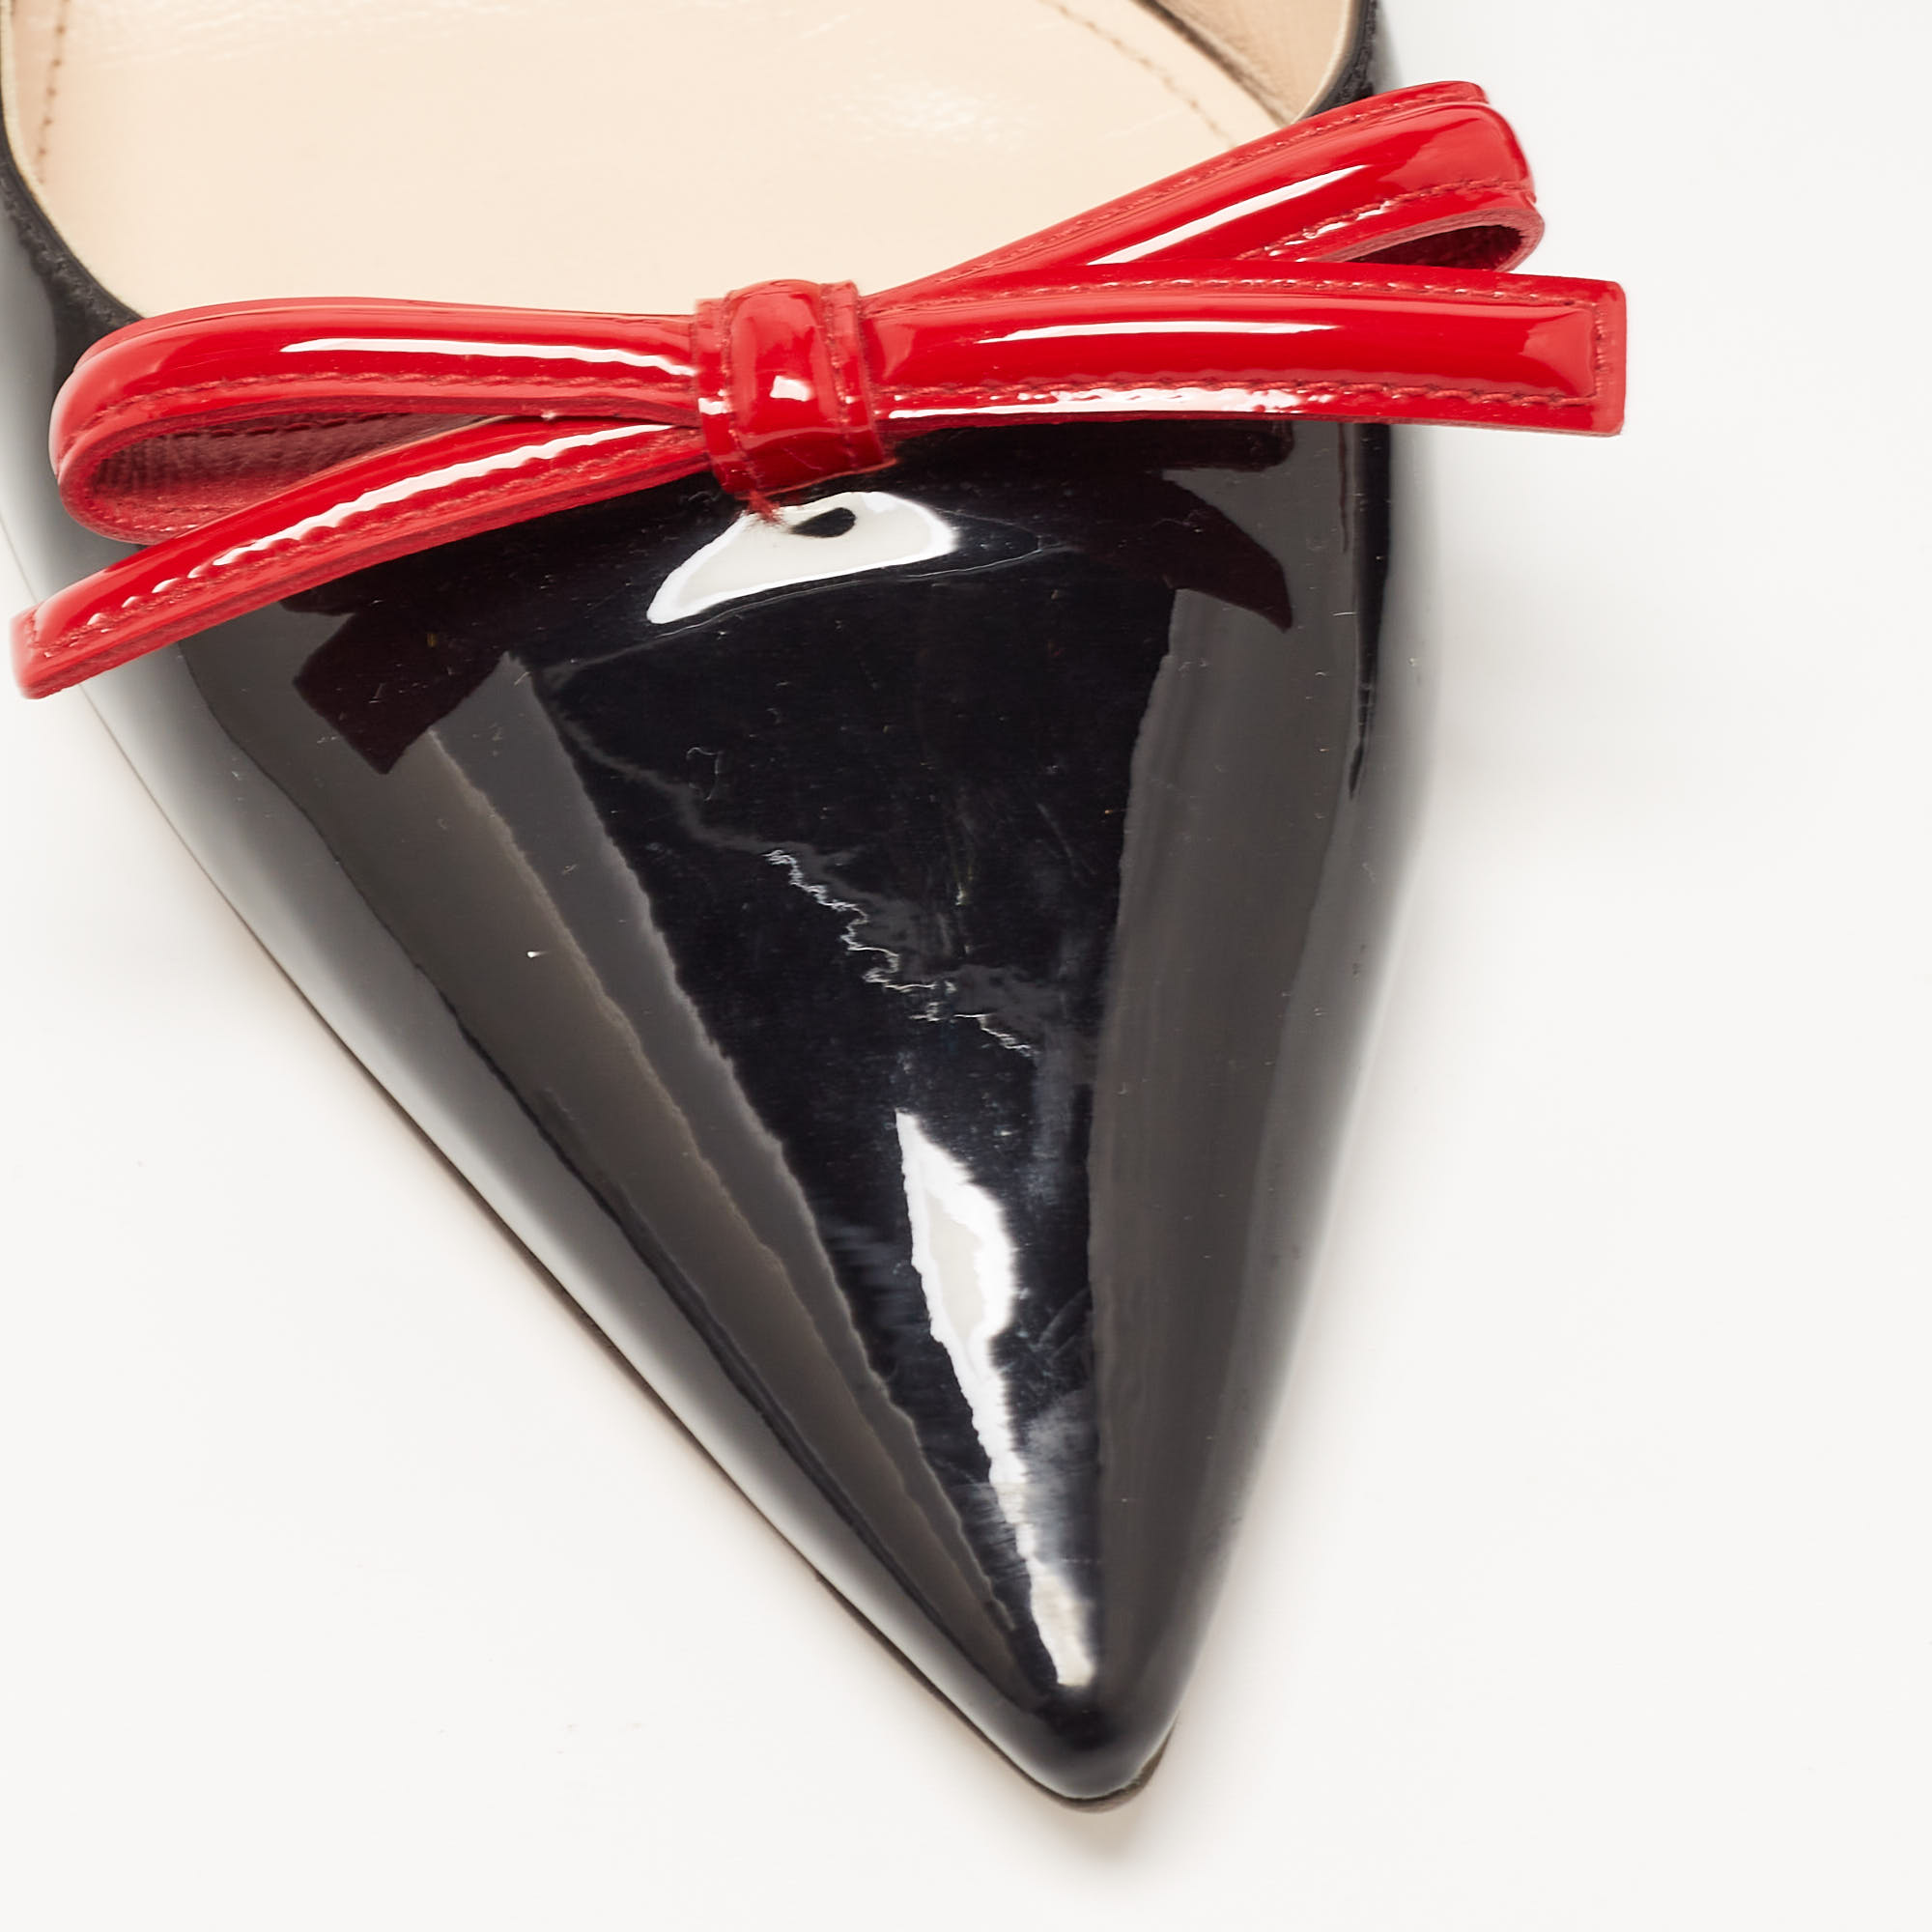 Prada Black/Red Patent Leather Bow Pointed Toe Slingback Sandals Size 40.5